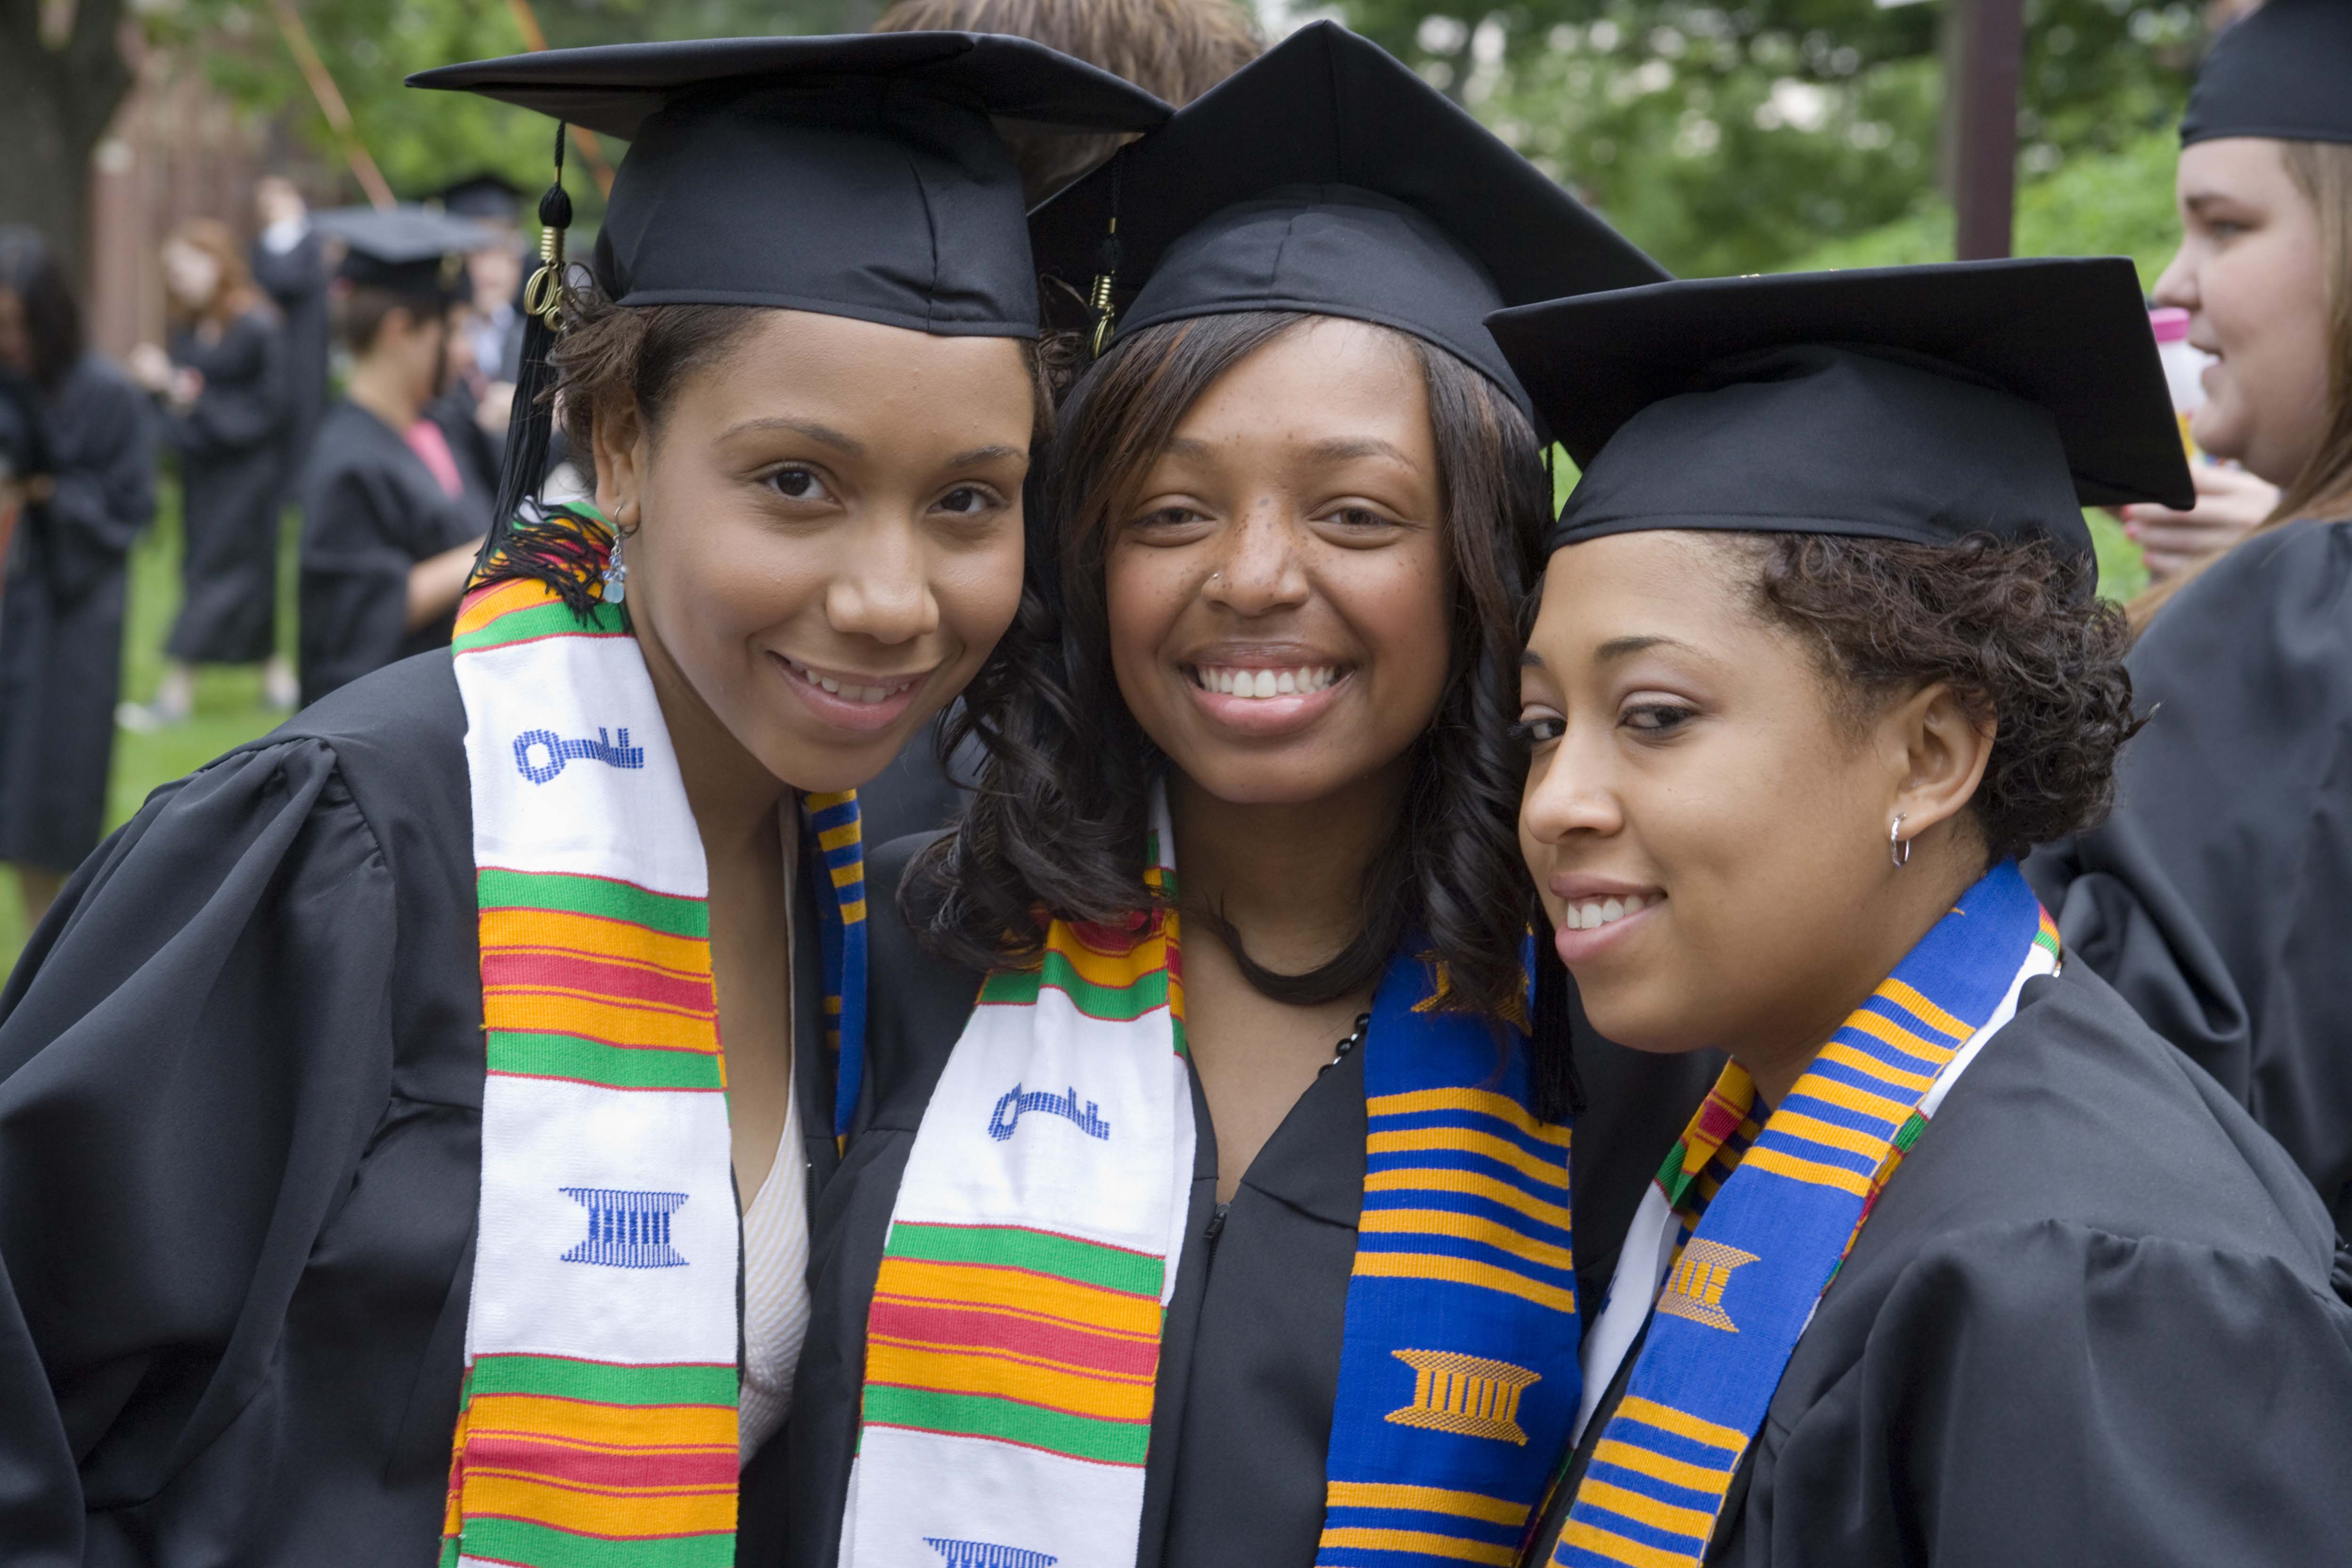 UVA graduates stand together in cap and gown smiling for the camera